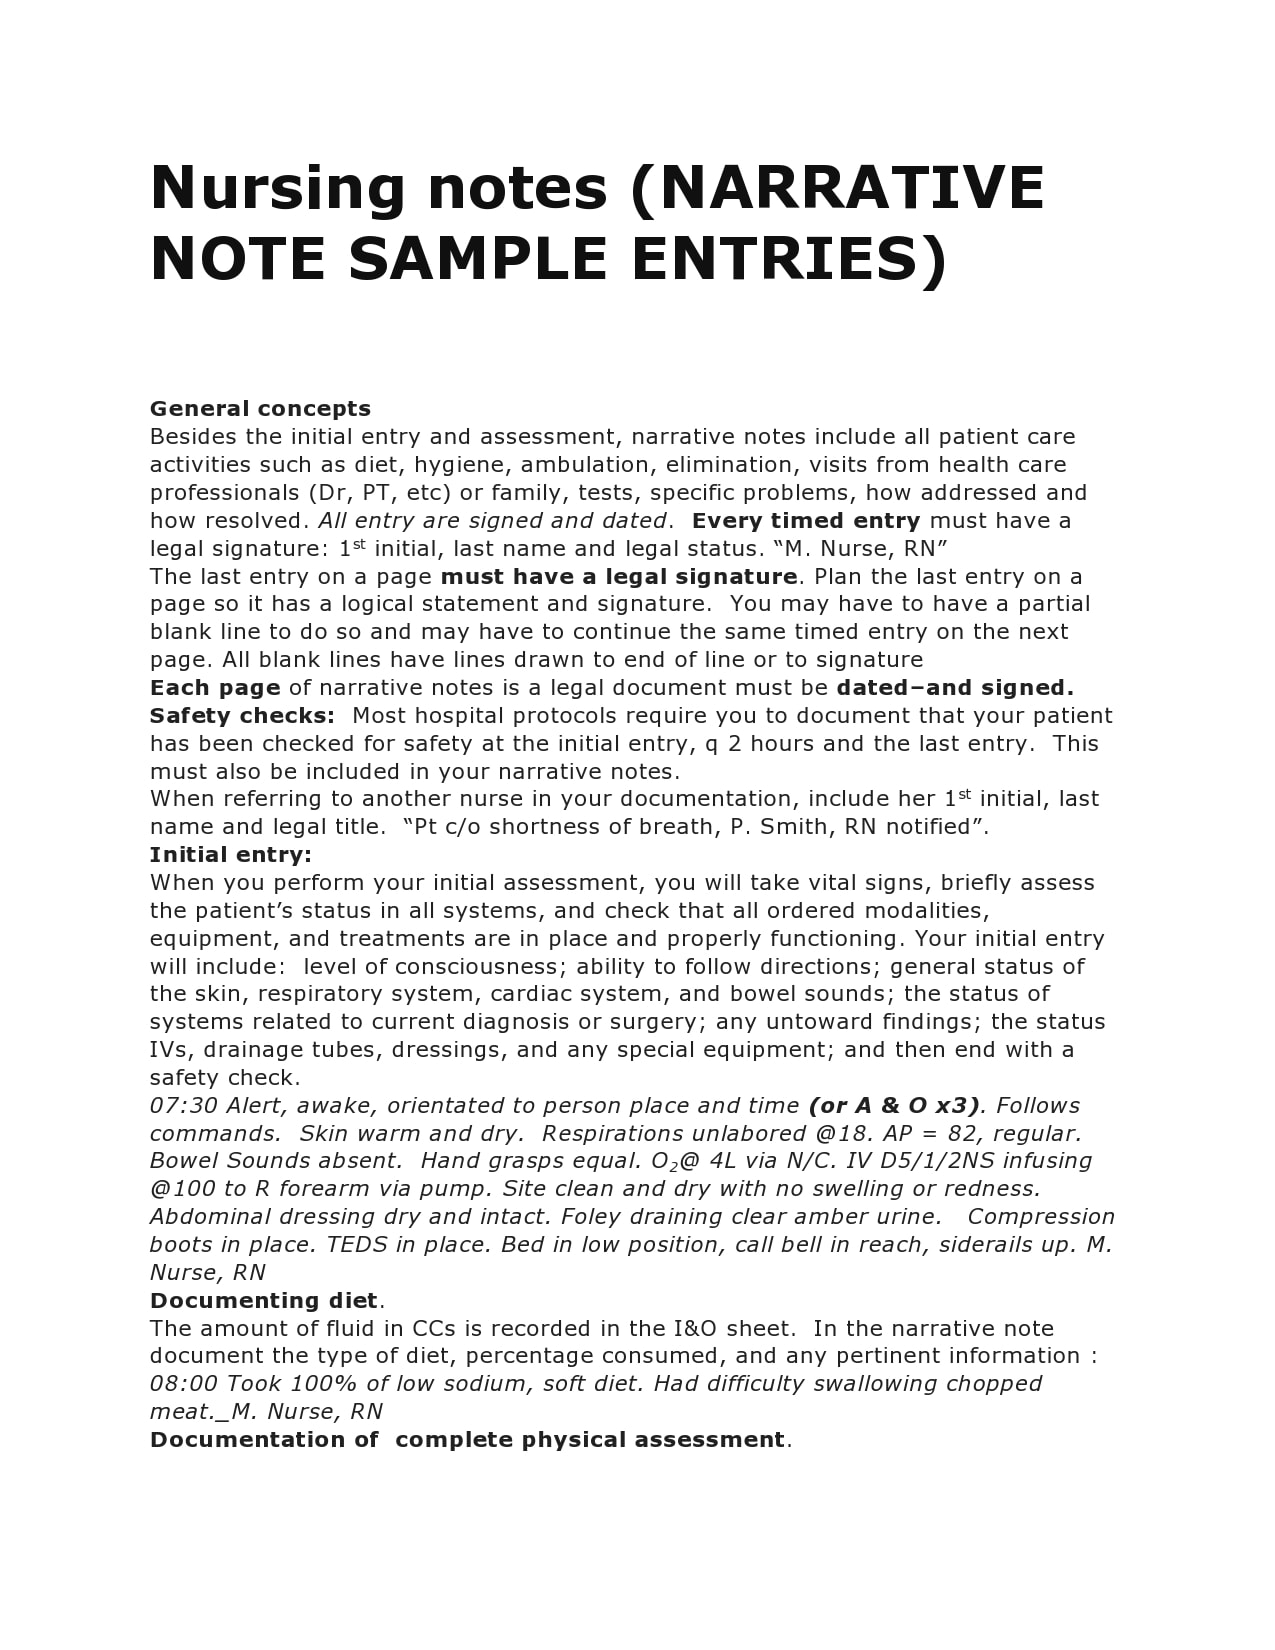 21 Useful Nursing Note Samples (+Templates) - TemplateArchive Within Nurse Notes Template